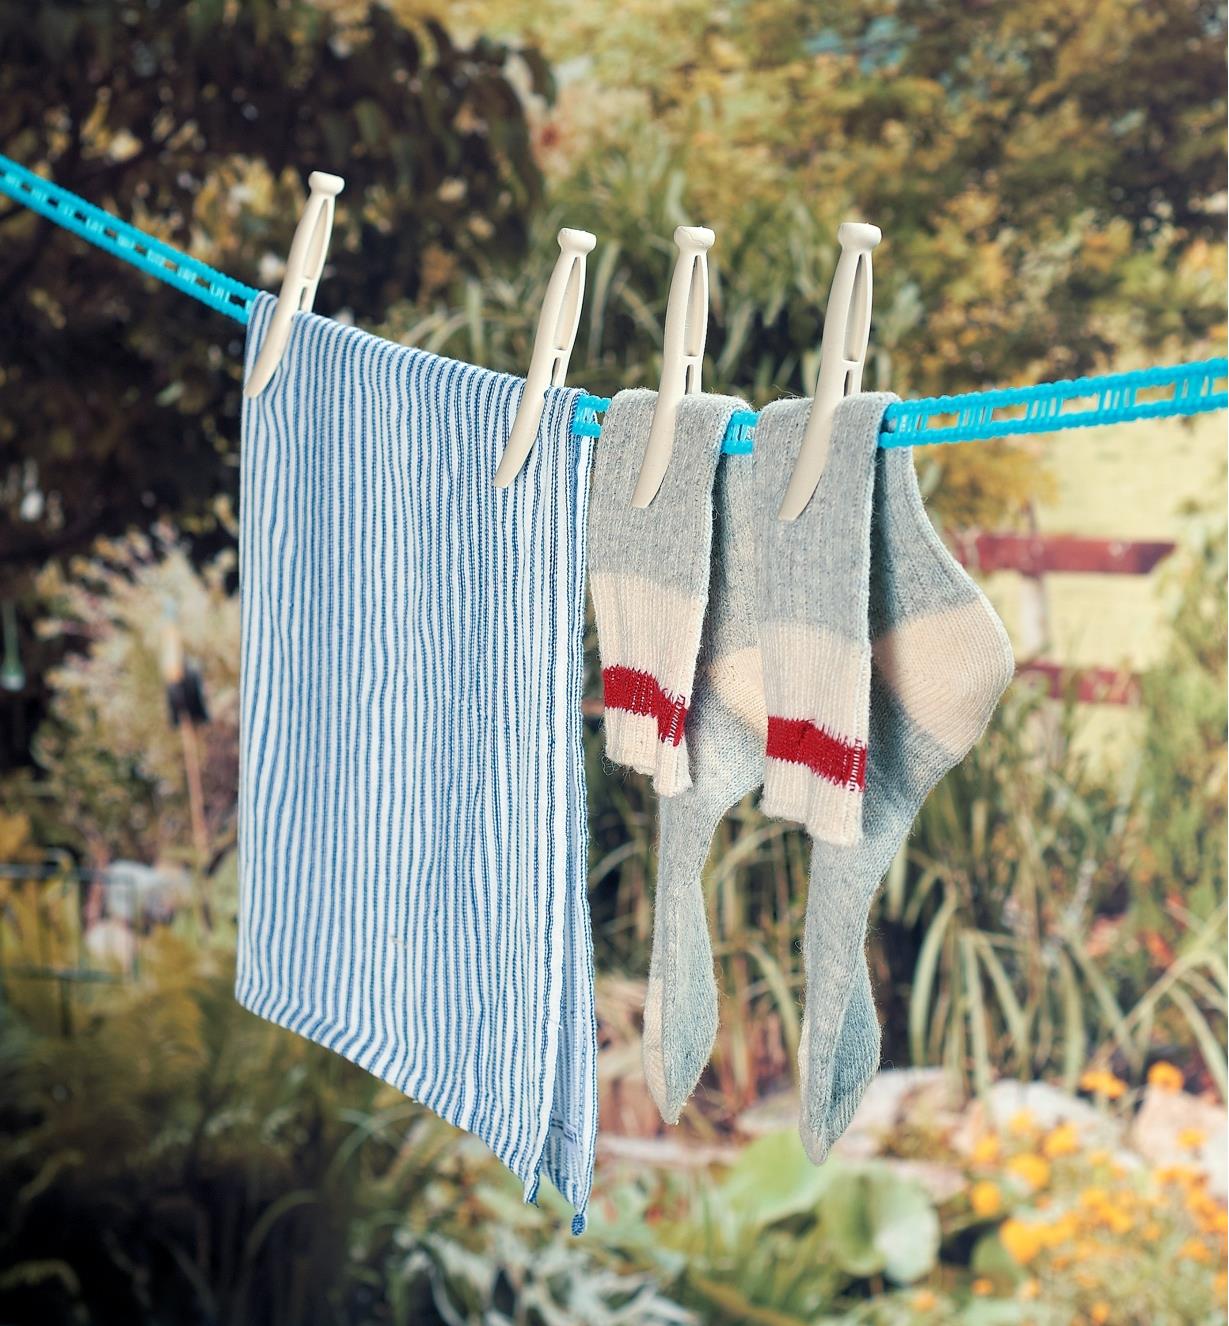 A pair of socks and a towel held on a clothesline with Grandma’s Clothespins